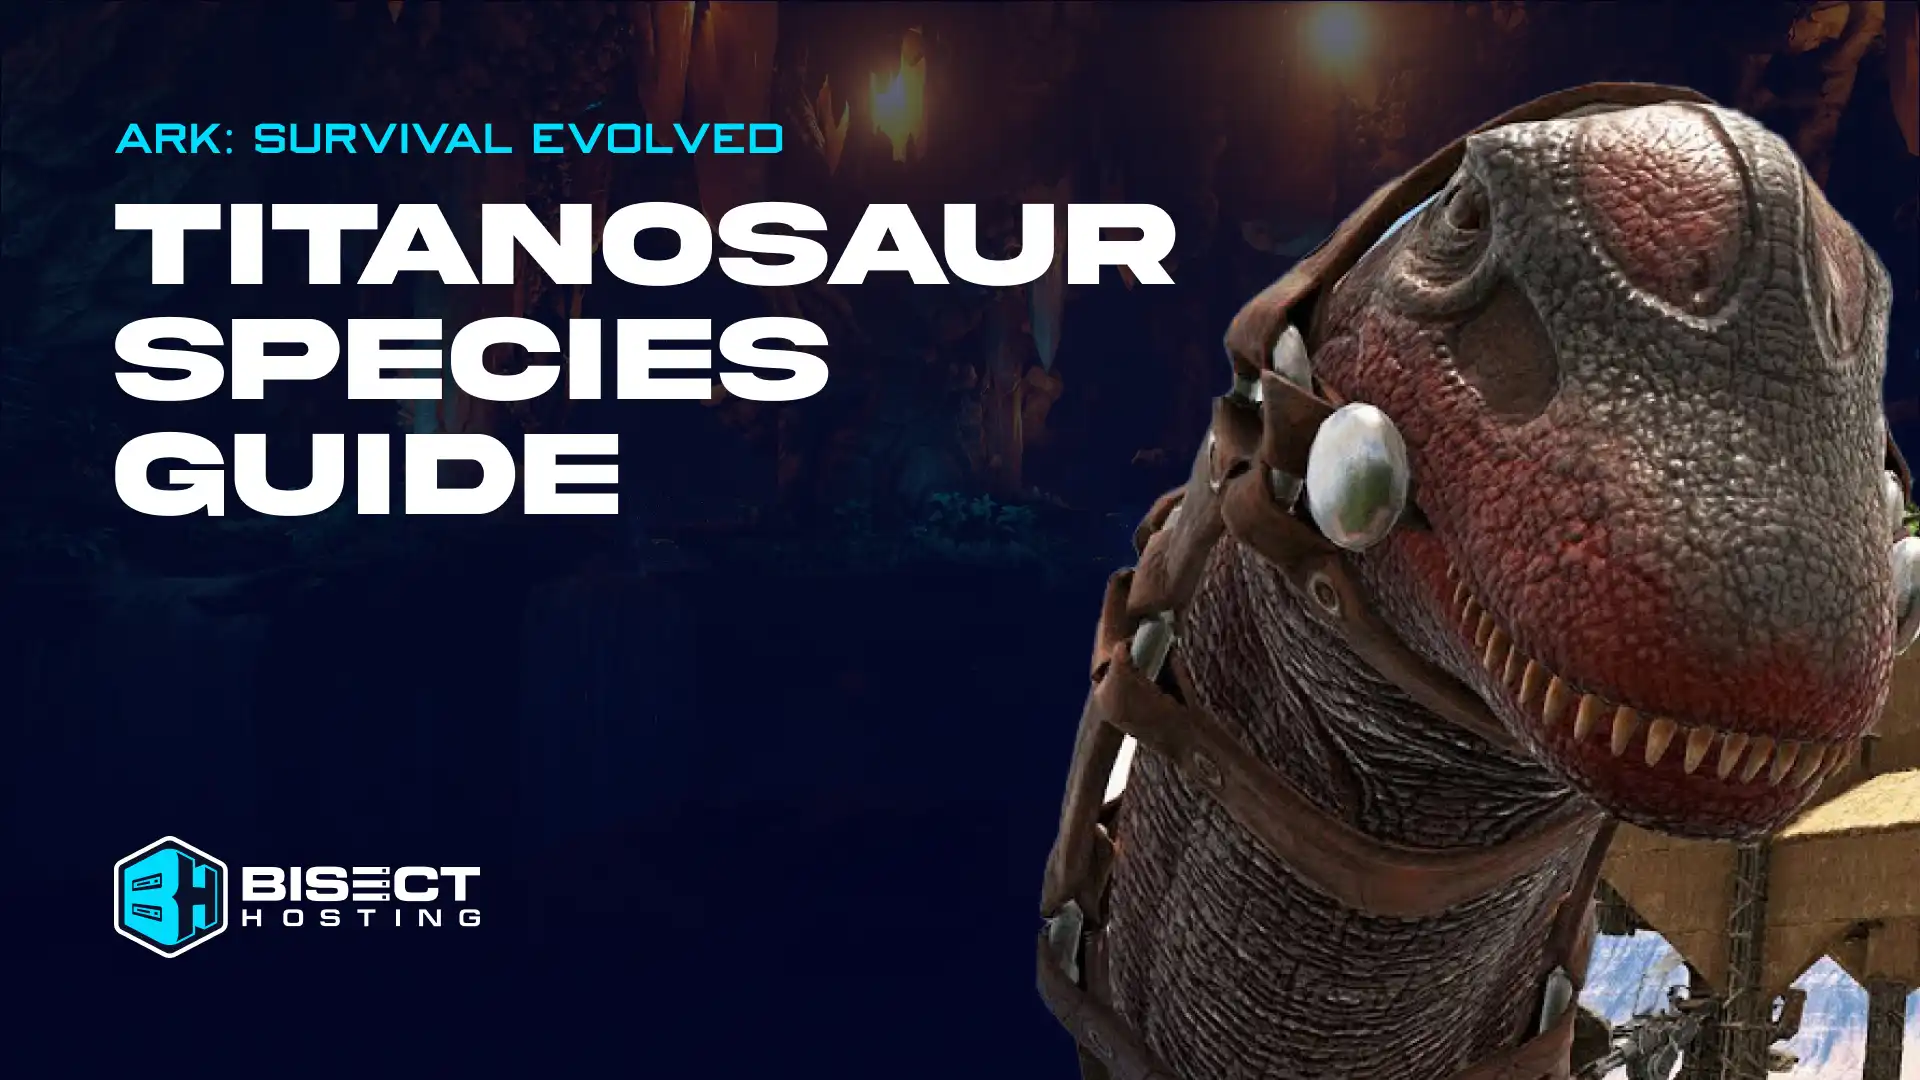 ARK: Survival Evolved Titanosaur Species Guide: How to Tame, Locations, & more